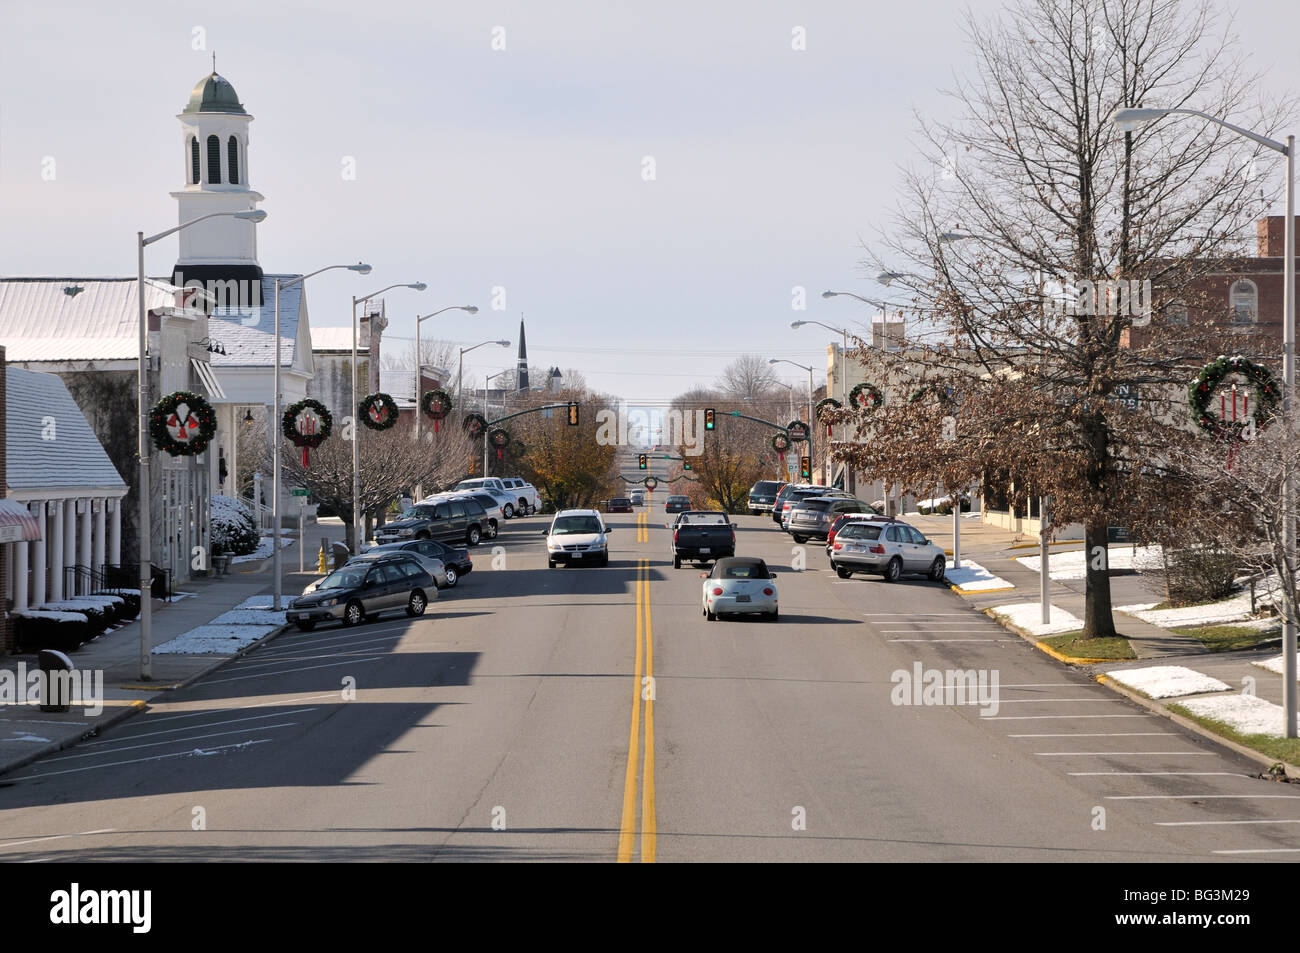 The town of Wytheville, Virginia, USA on a sunny yet snowy December morning. Photo by Darrell Young. Stock Photo